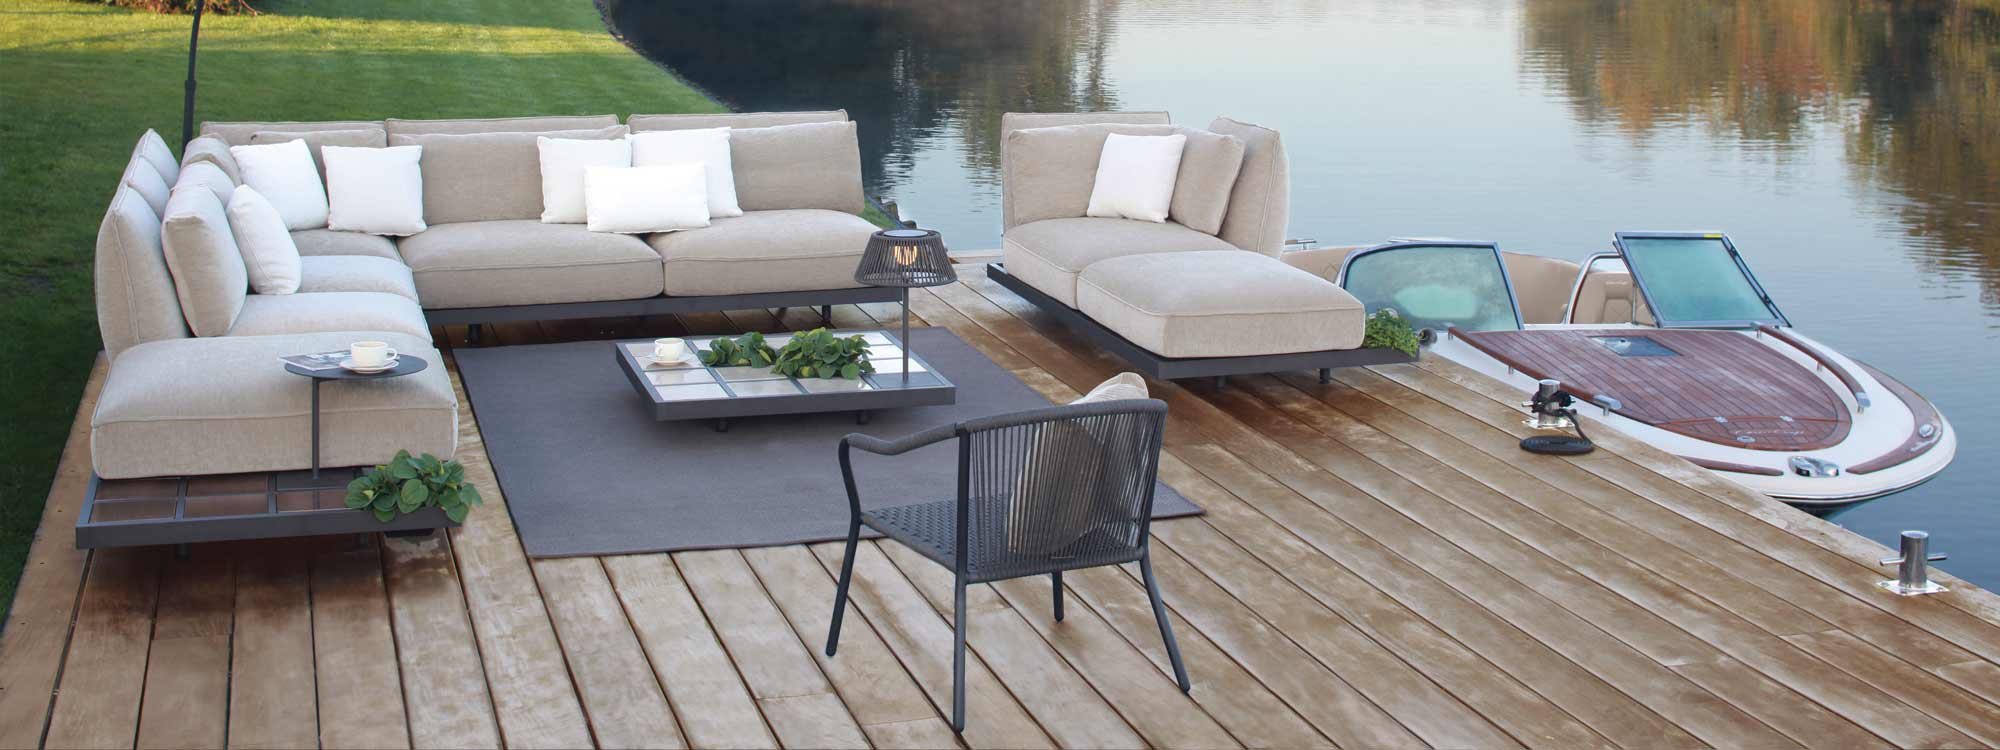 Lakeside installation of Mozaix Alu modern garden sofa is a luxury outdoor lounge set in high quality garden furniture materials by Royal Botania garden furniture